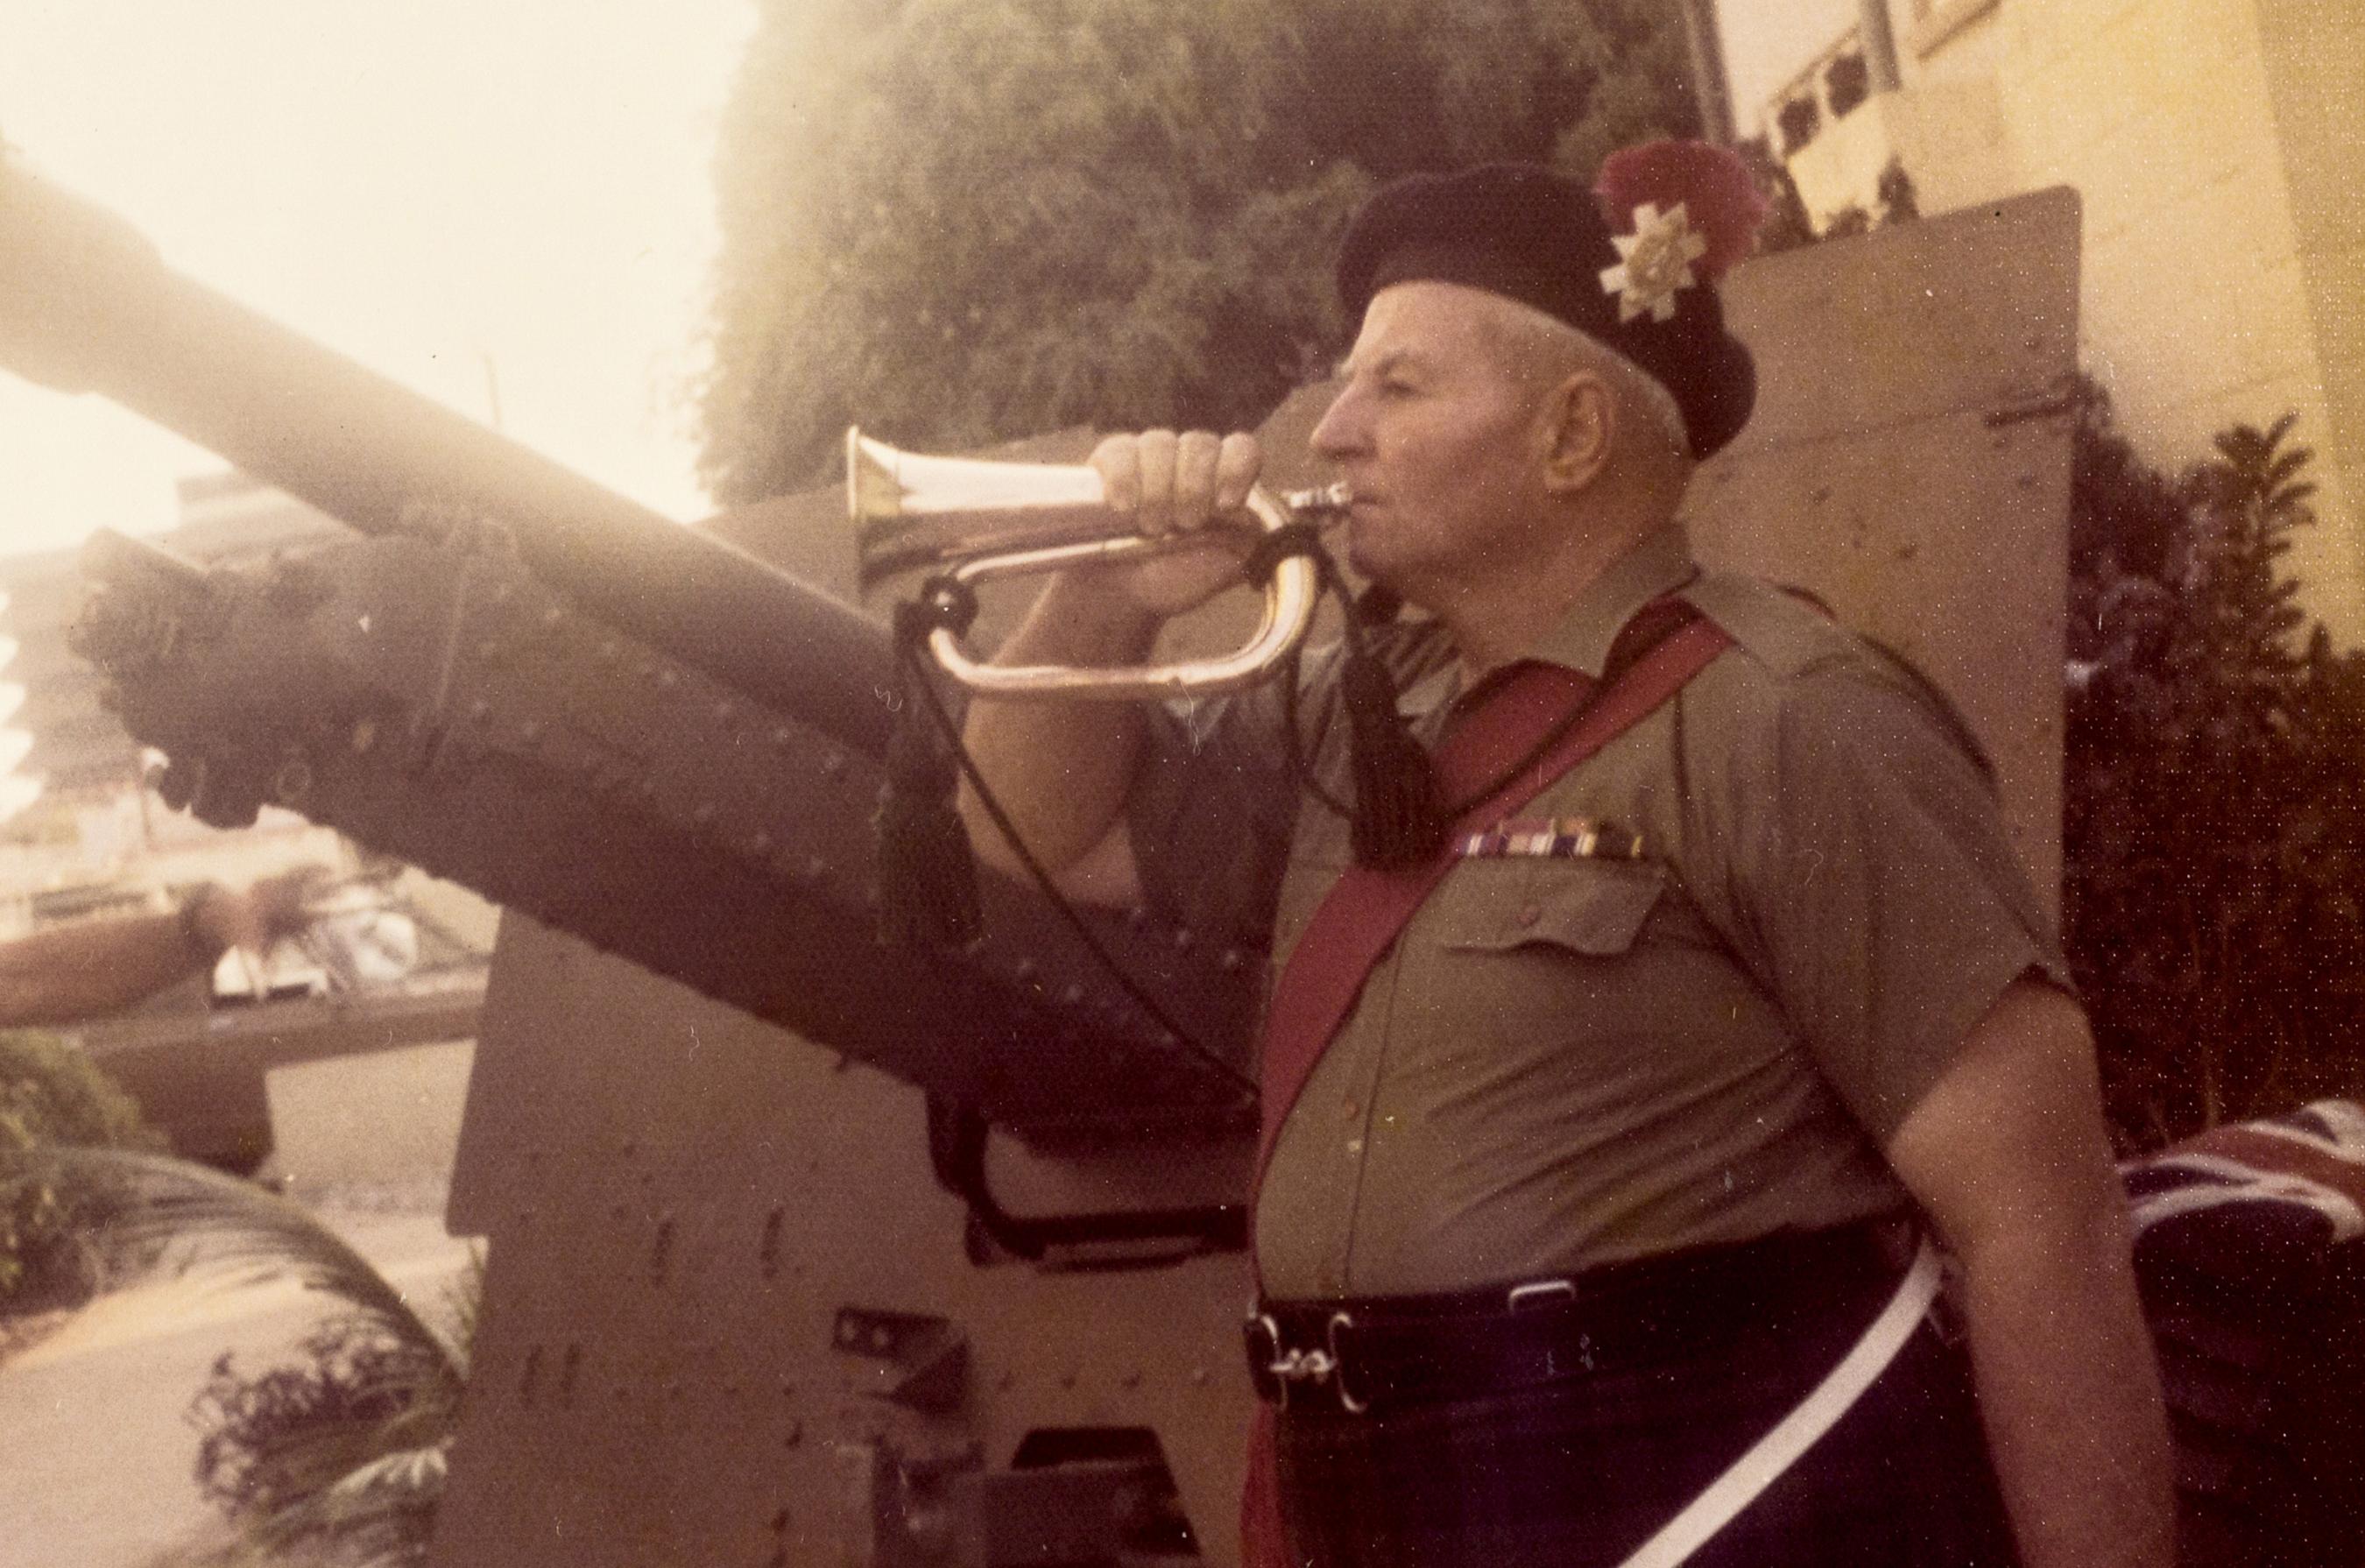 Soldier in uniform playing a bugle.